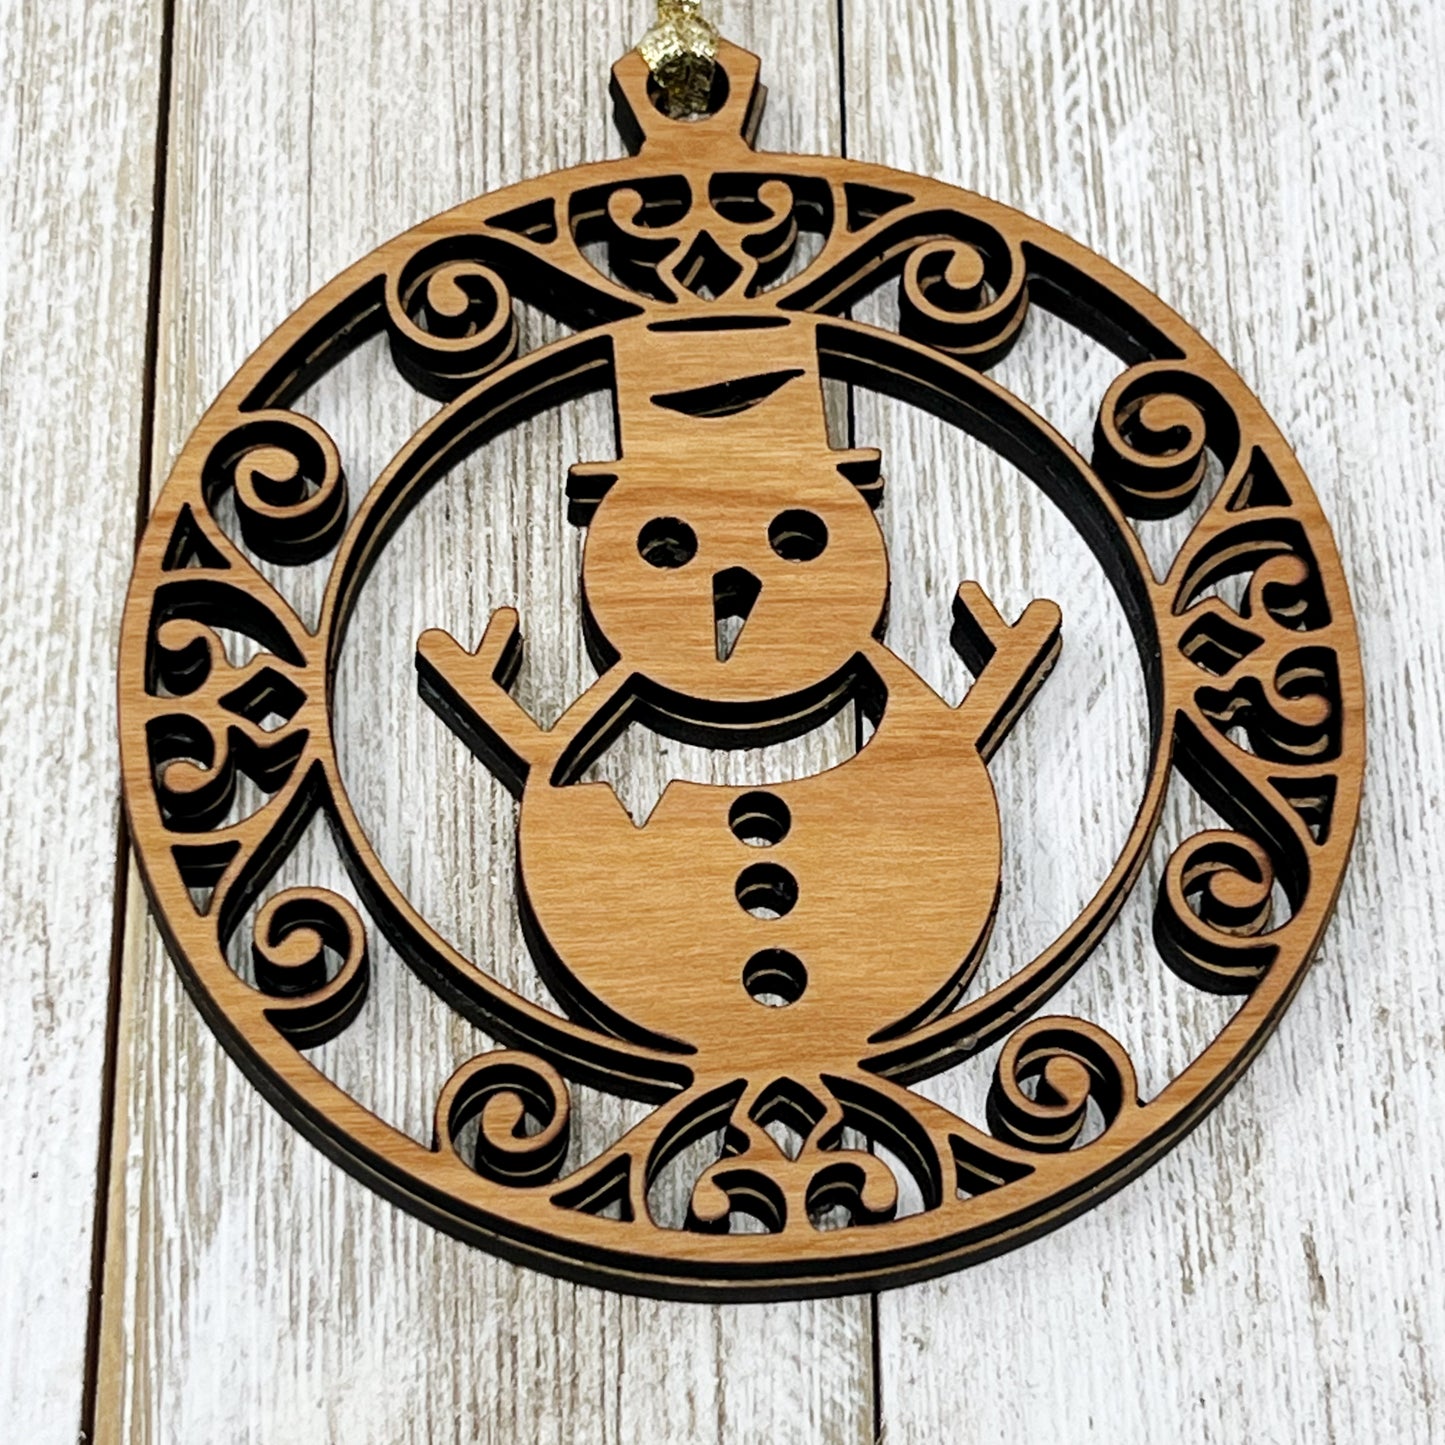 Handcrafted Wooden Snowman Ornaments - Rustic Whimsical Holiday Decor | Charming Festive Seasonal Decorations